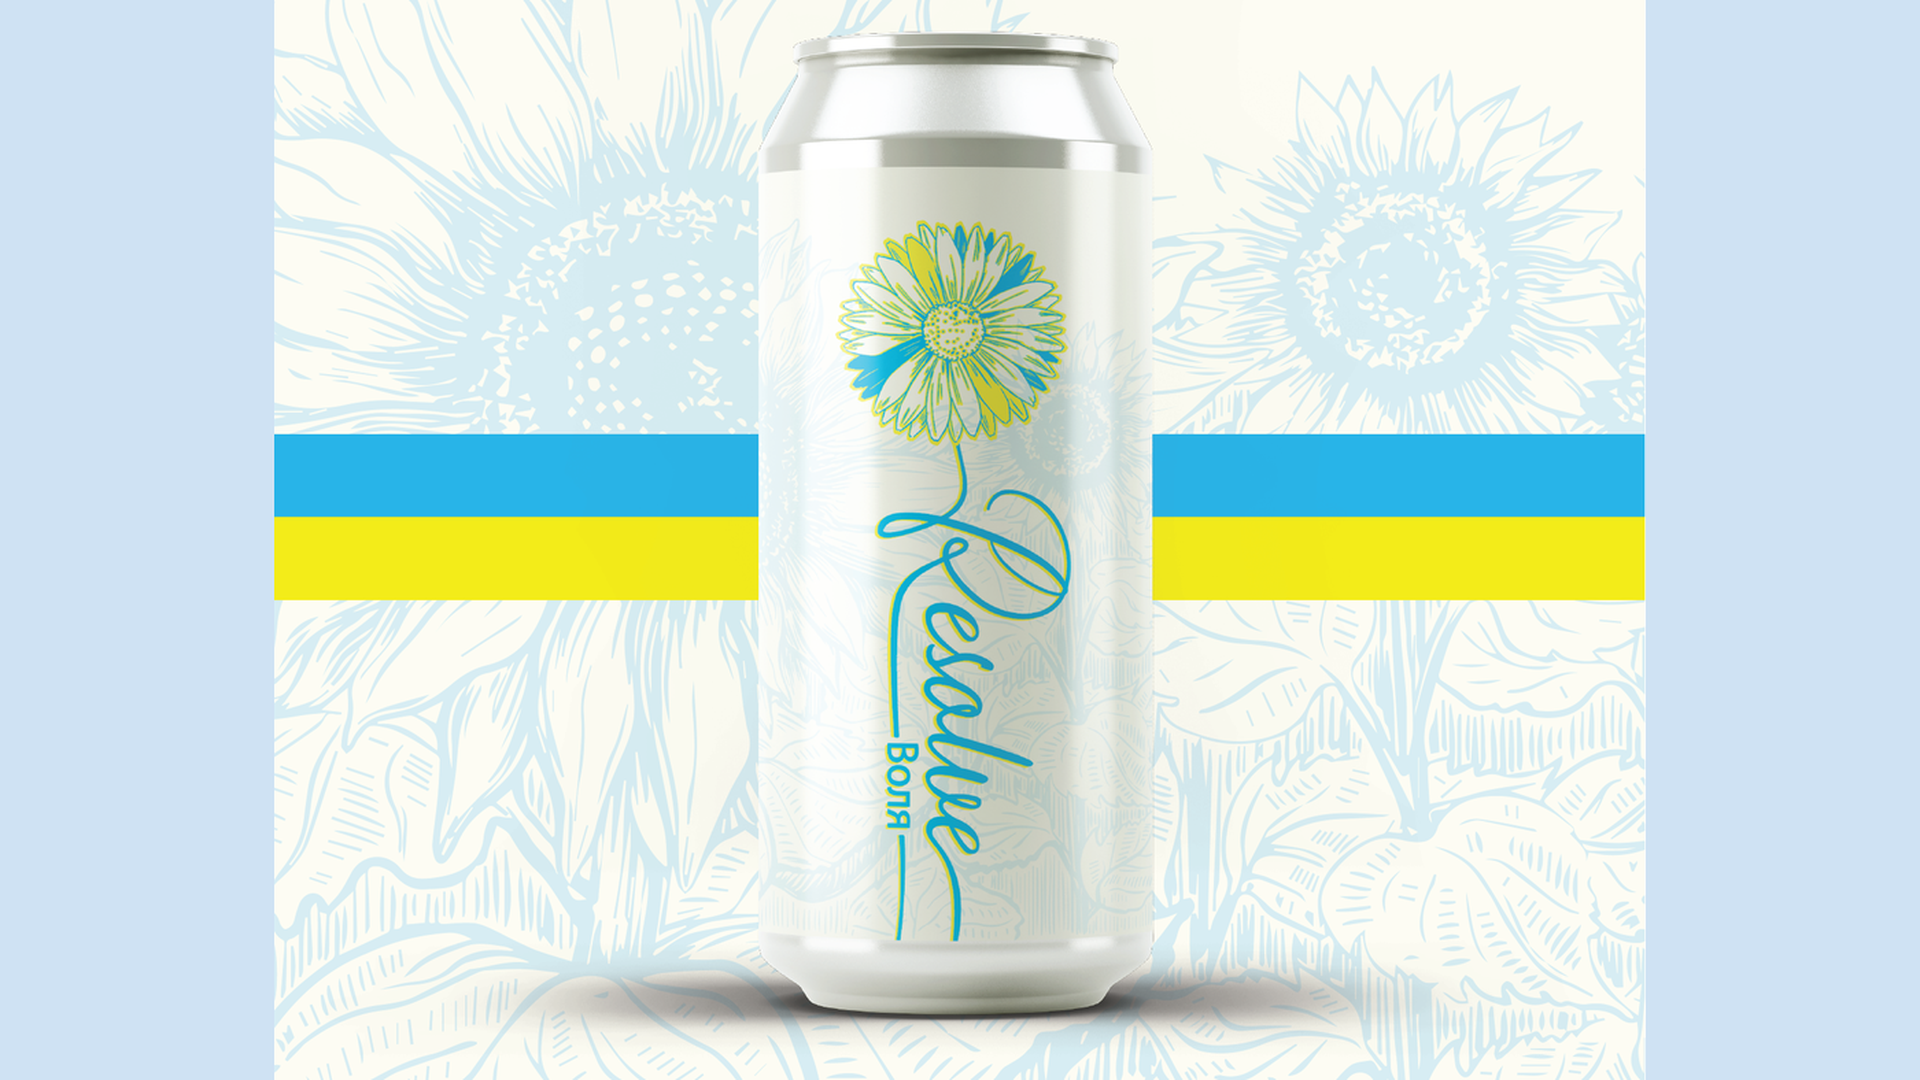 A can of RESOLVE beer featuring a blue and yellow sunflower on its label 